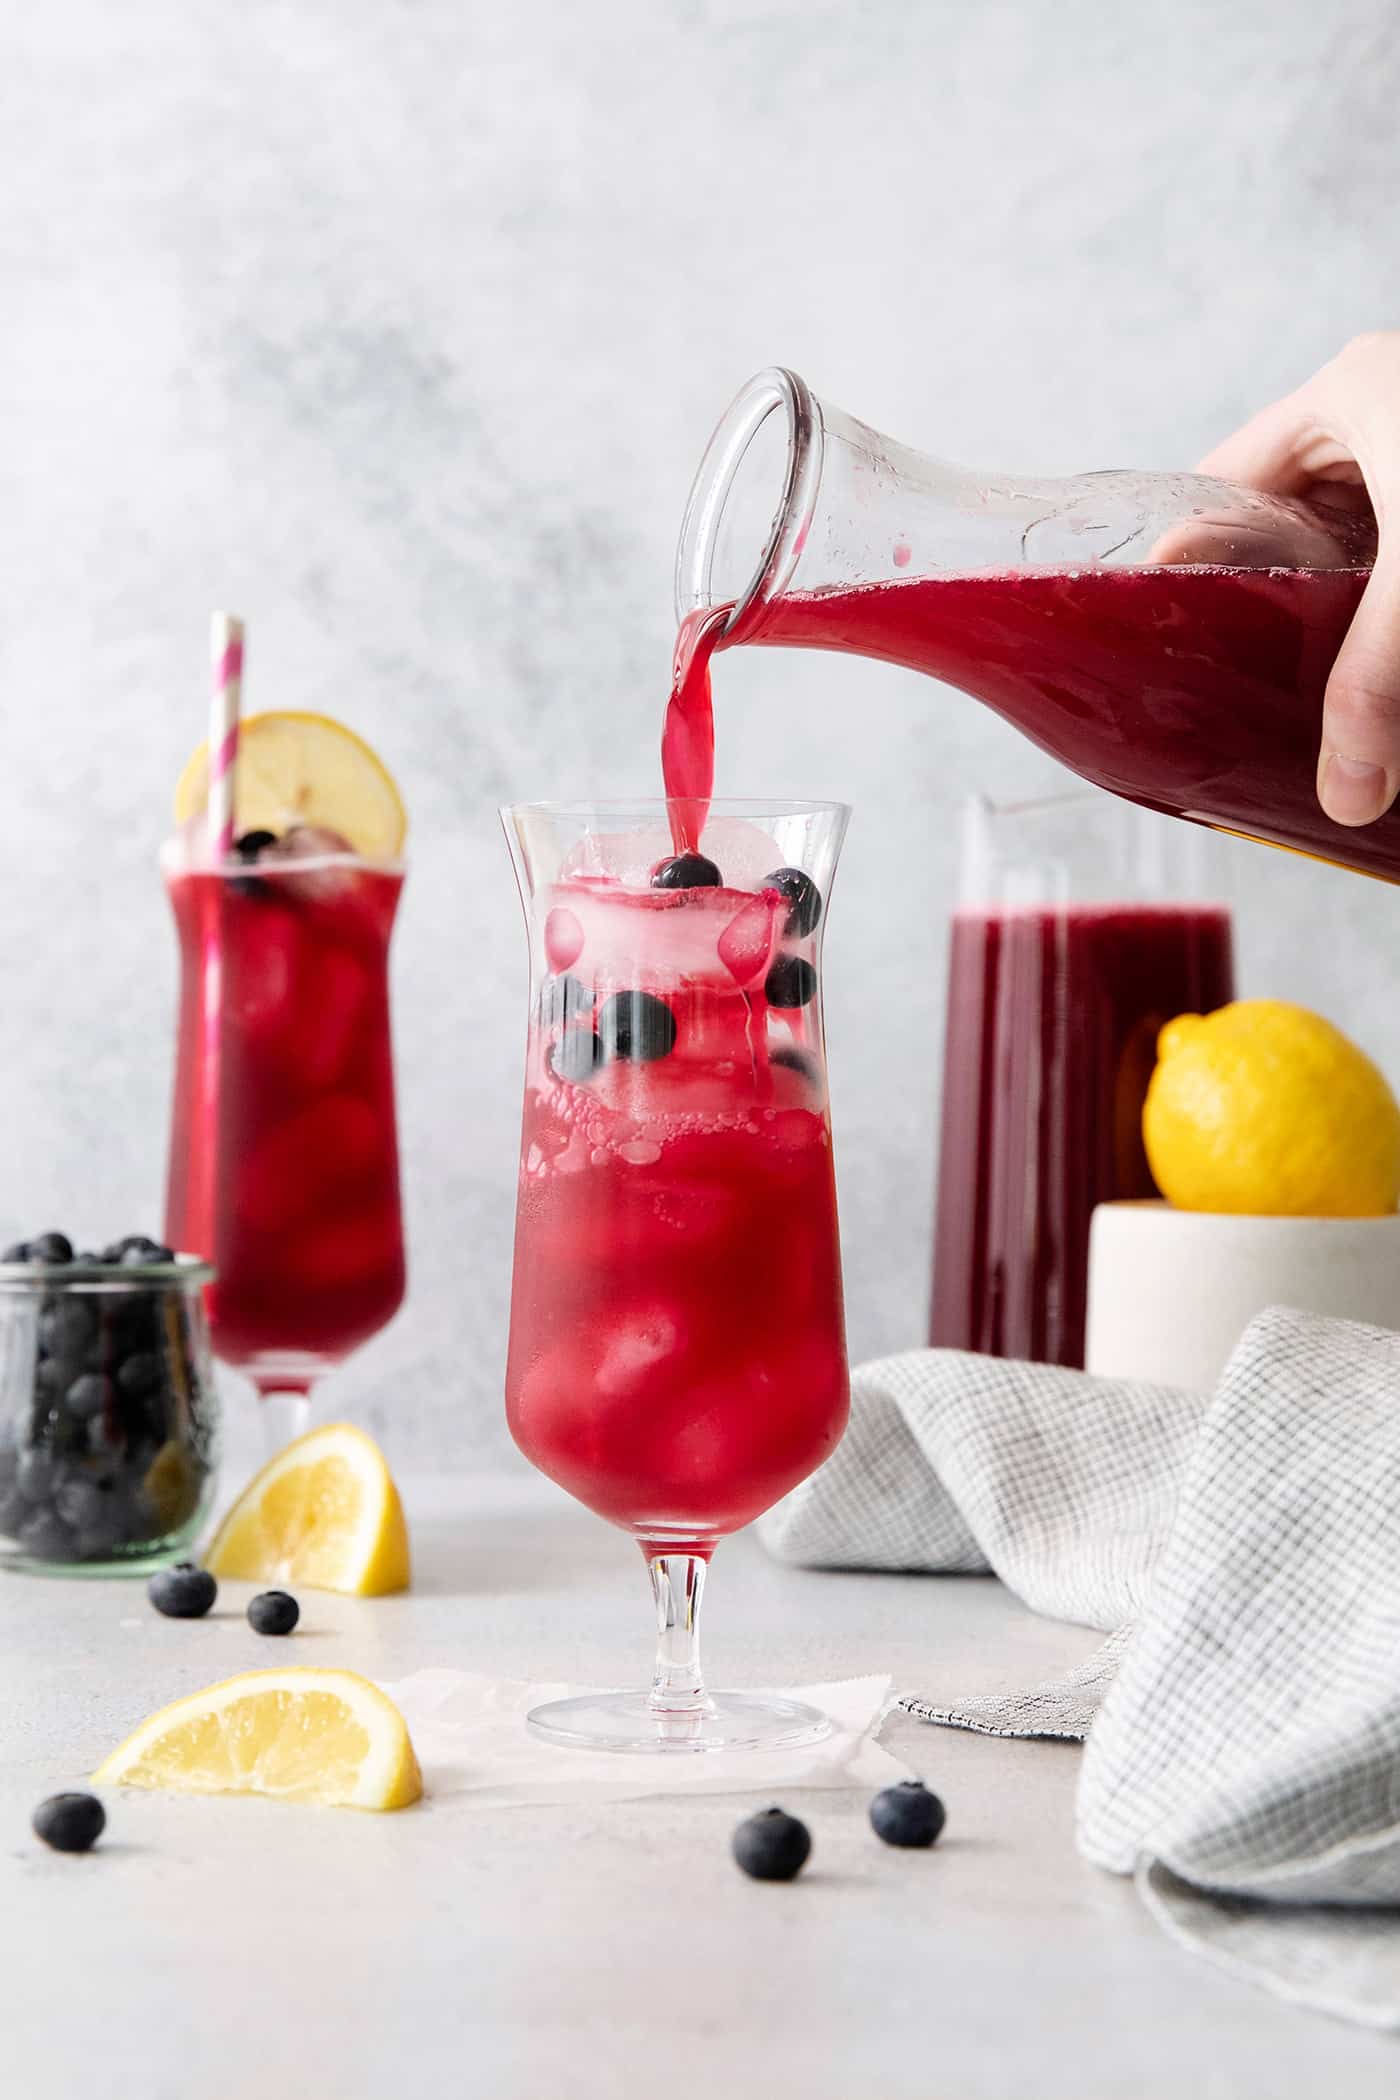 Blueberry lemonade being poured into a glass over ice